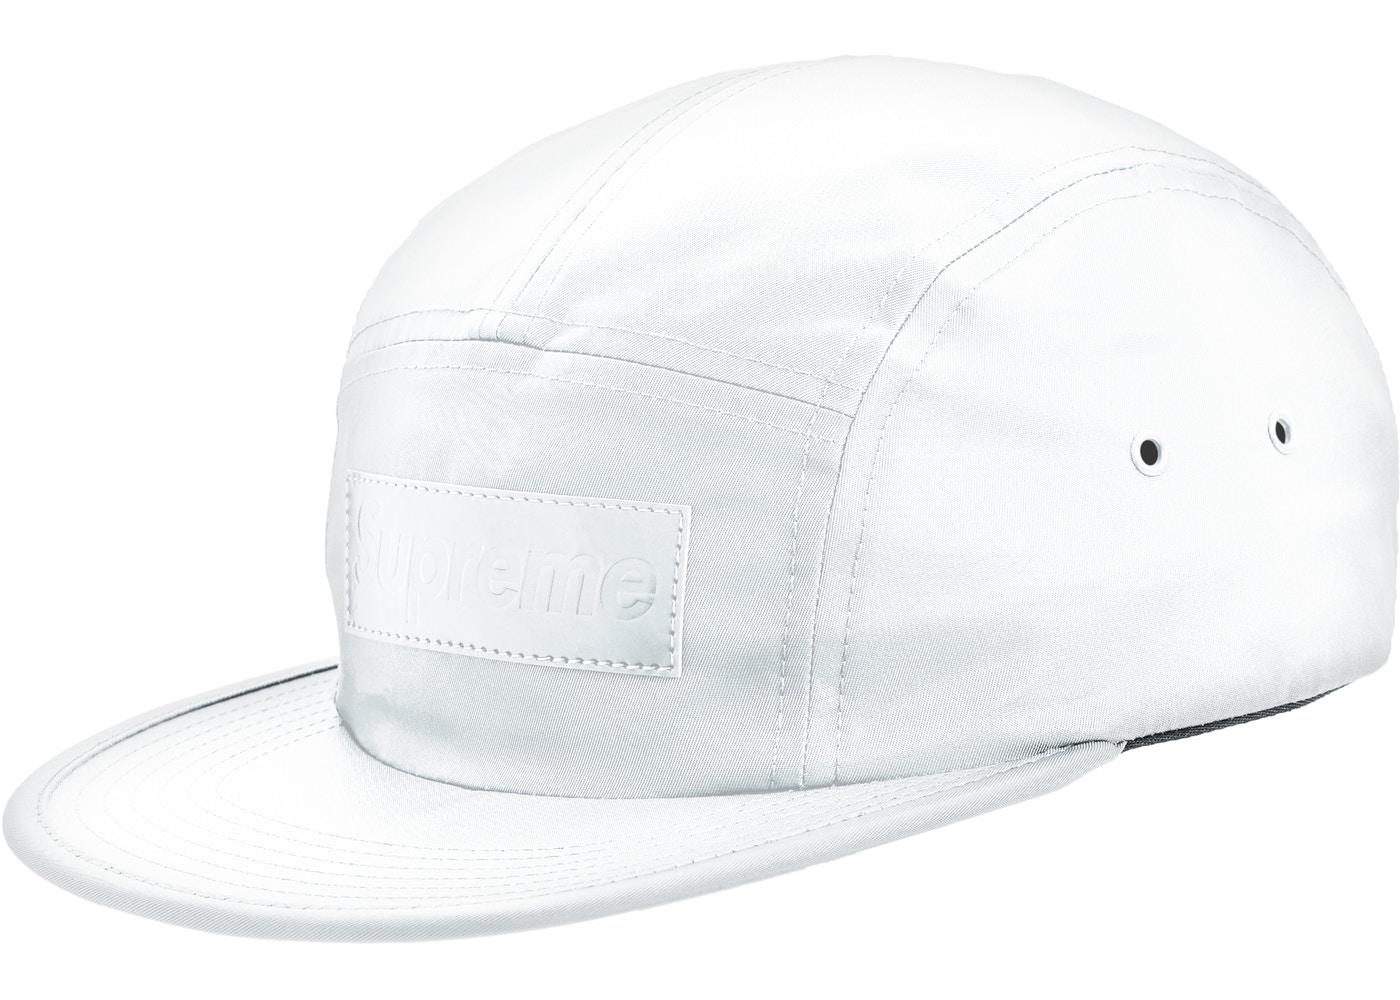 Supreme Patent Leather Patch Camp Cap White - StockX News